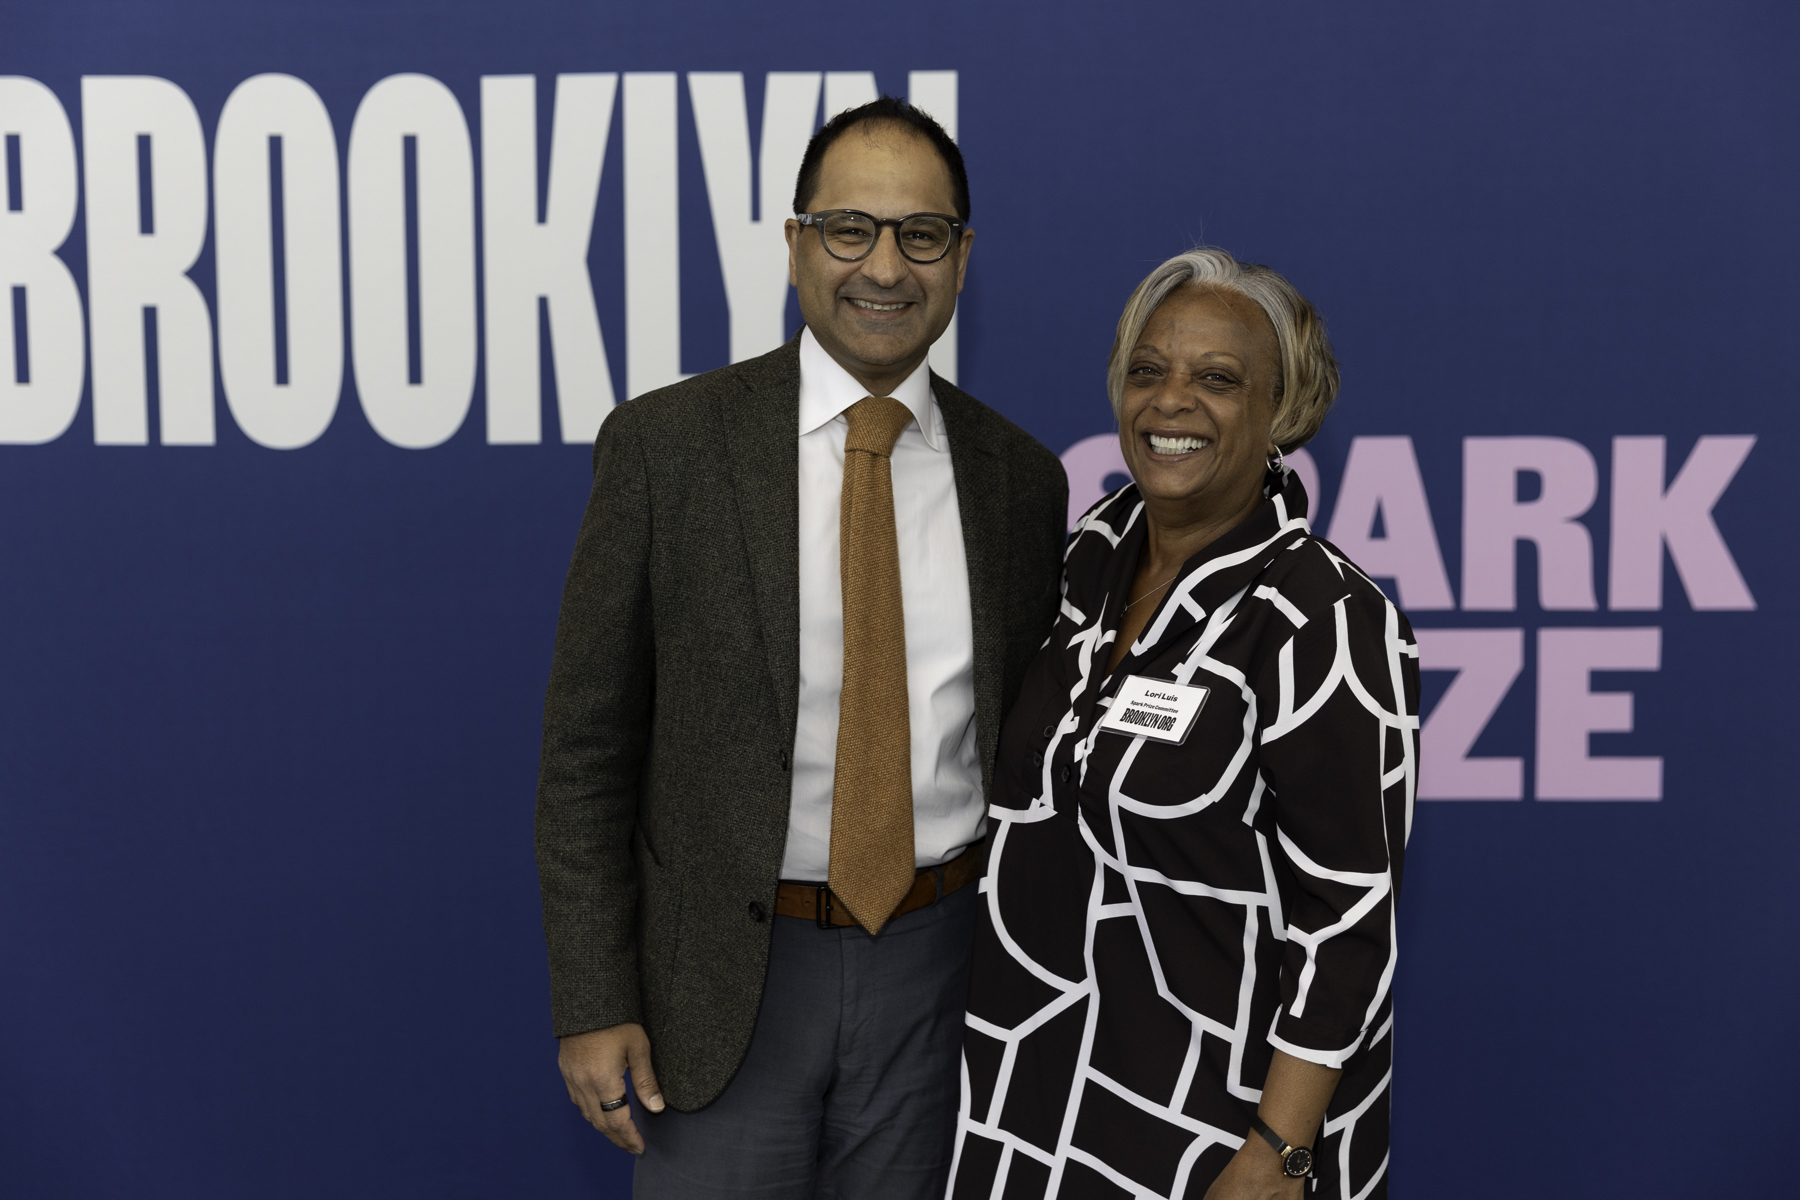 Two individuals smiling for a photo at an event with a backdrop displaying "brooklyn.